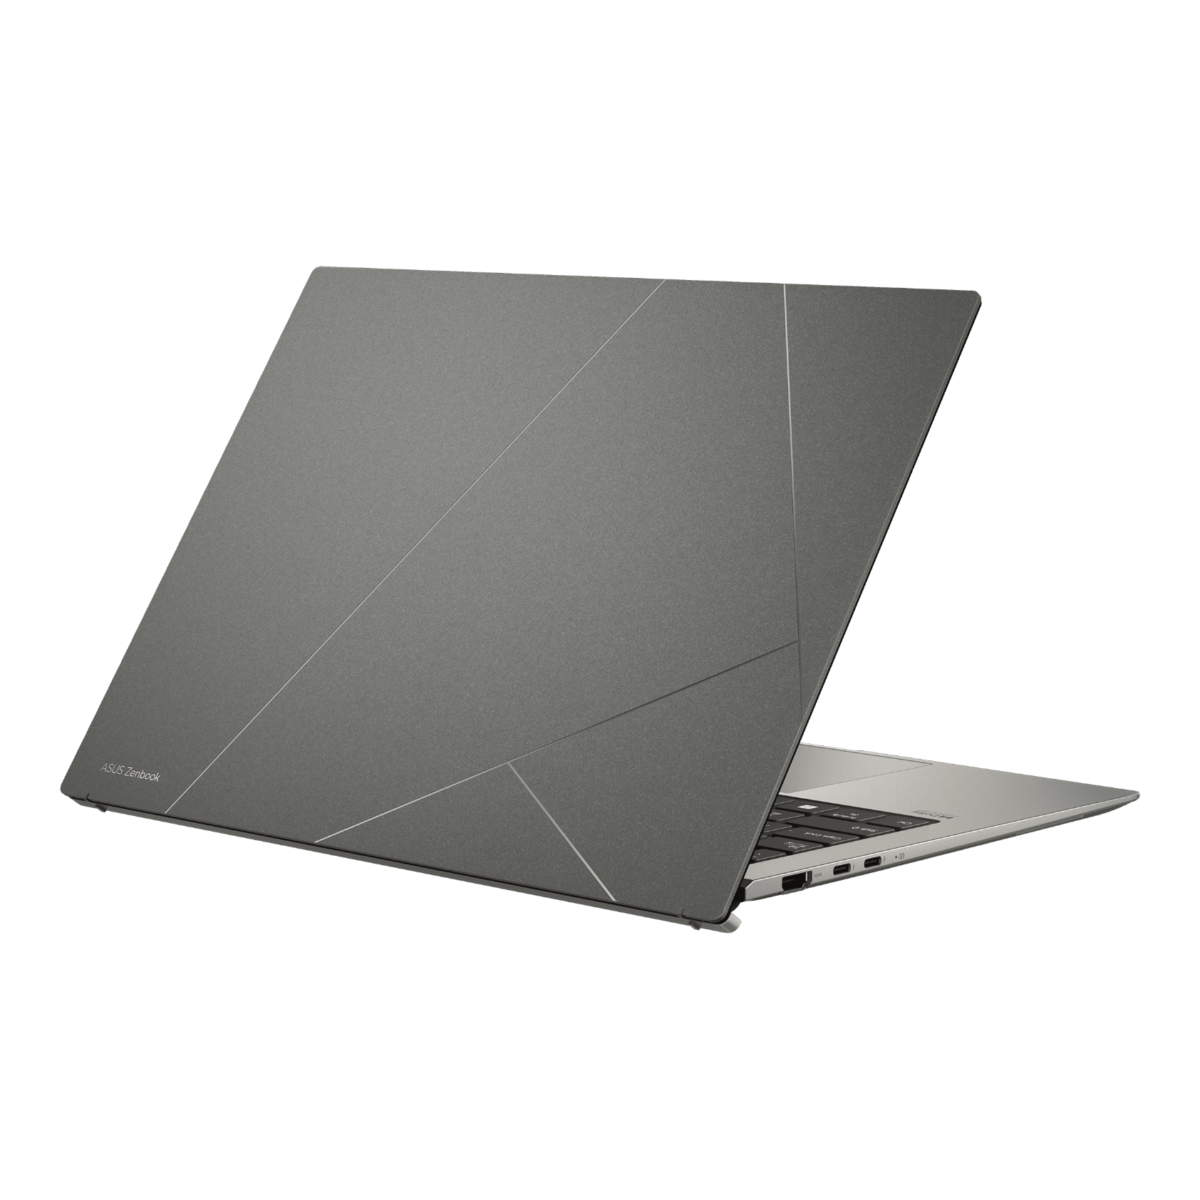 The chassis of the new Zenbook S 13 OLED series is made of aluminium alloy, with clean lines and a svelte silhouette that turns heads. The new lid design features the ASUS monogram with refreshing new colours and materials across the series. The ASUS Zenbook S 13 OLED series is available in two colour schemes: Basalt Gray